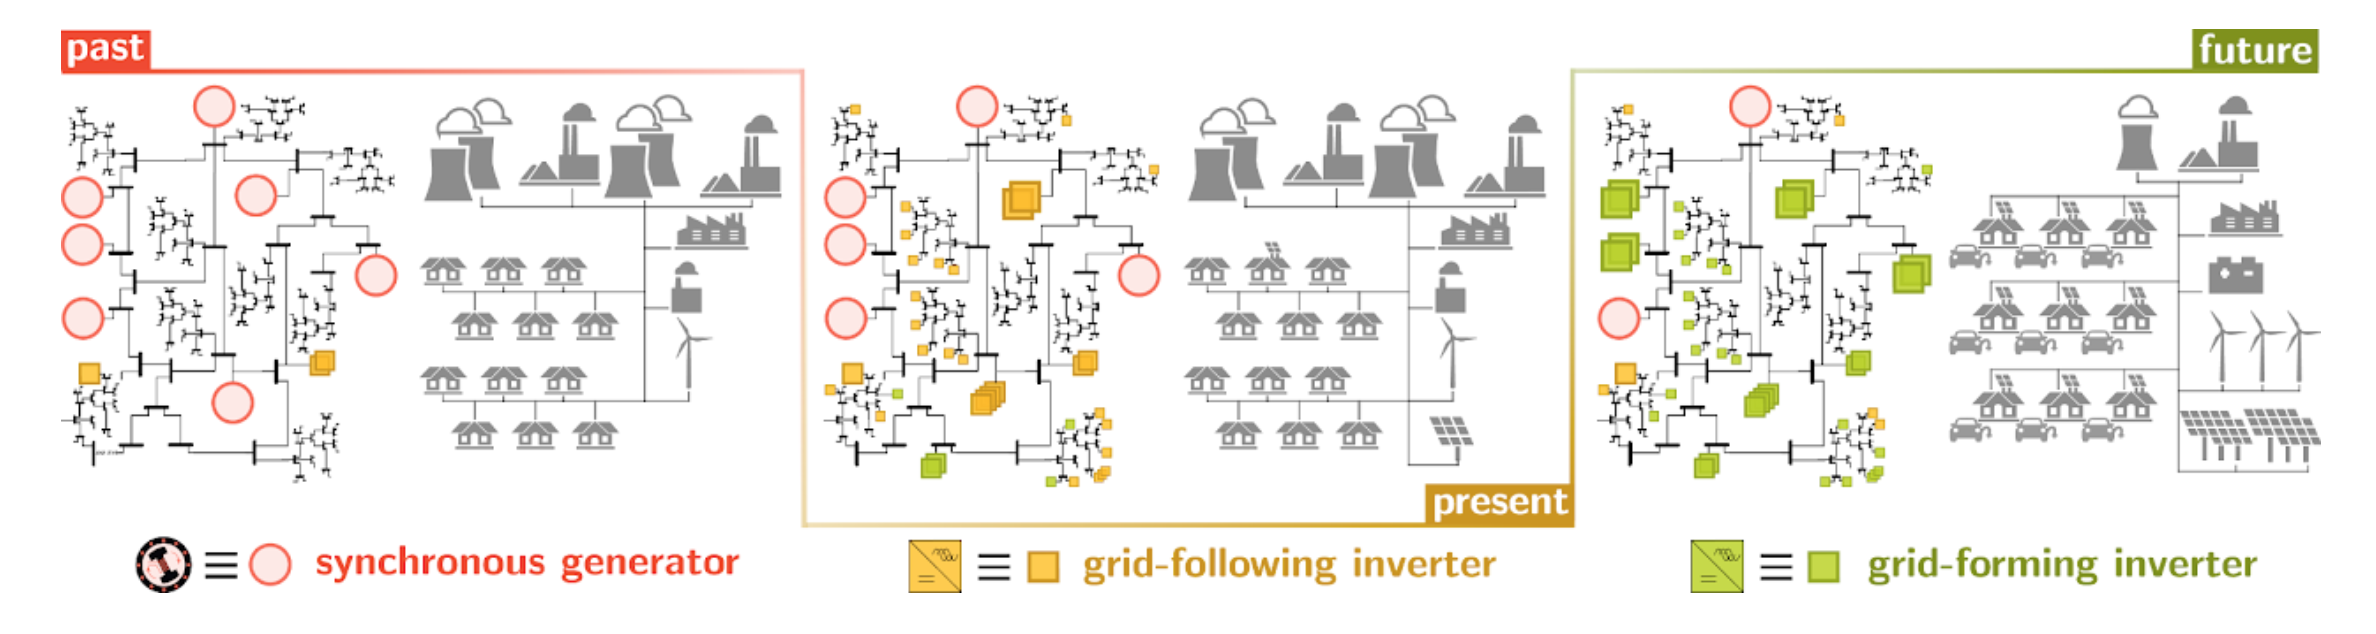 Image showing past, present, and future power grids